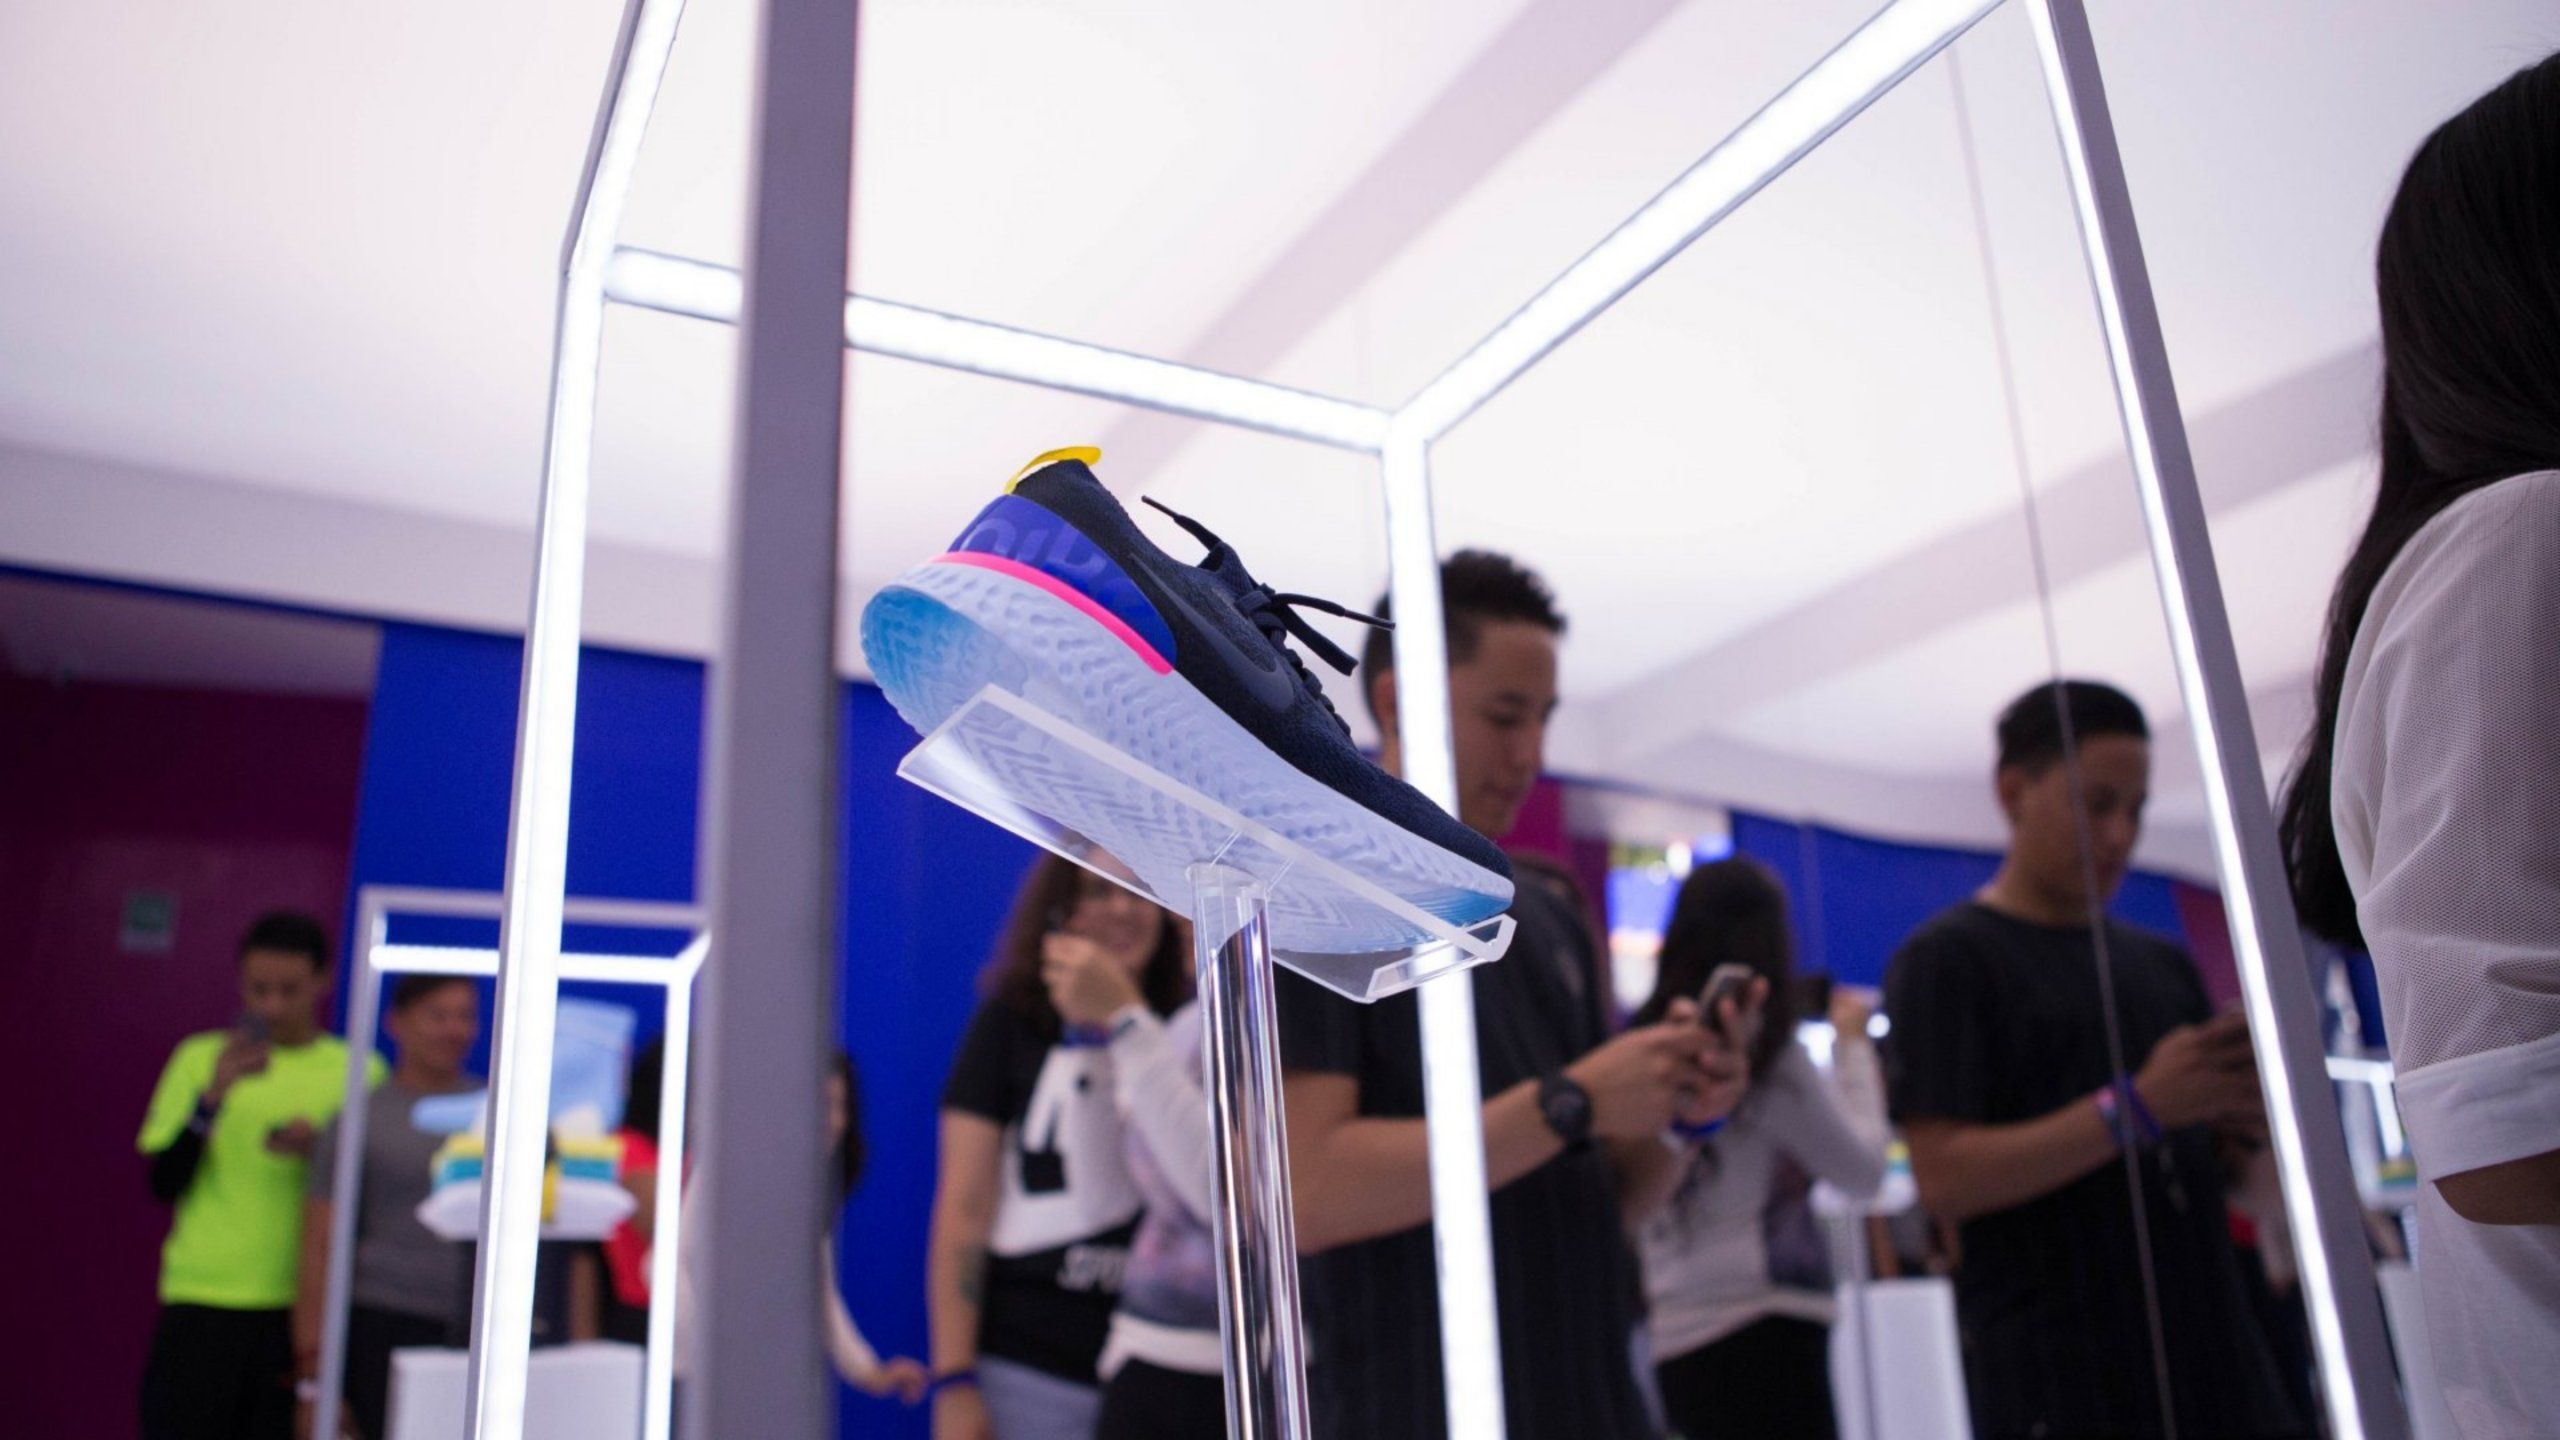 Nike React shoe on display in exhibit. Young people on their cell phones in background